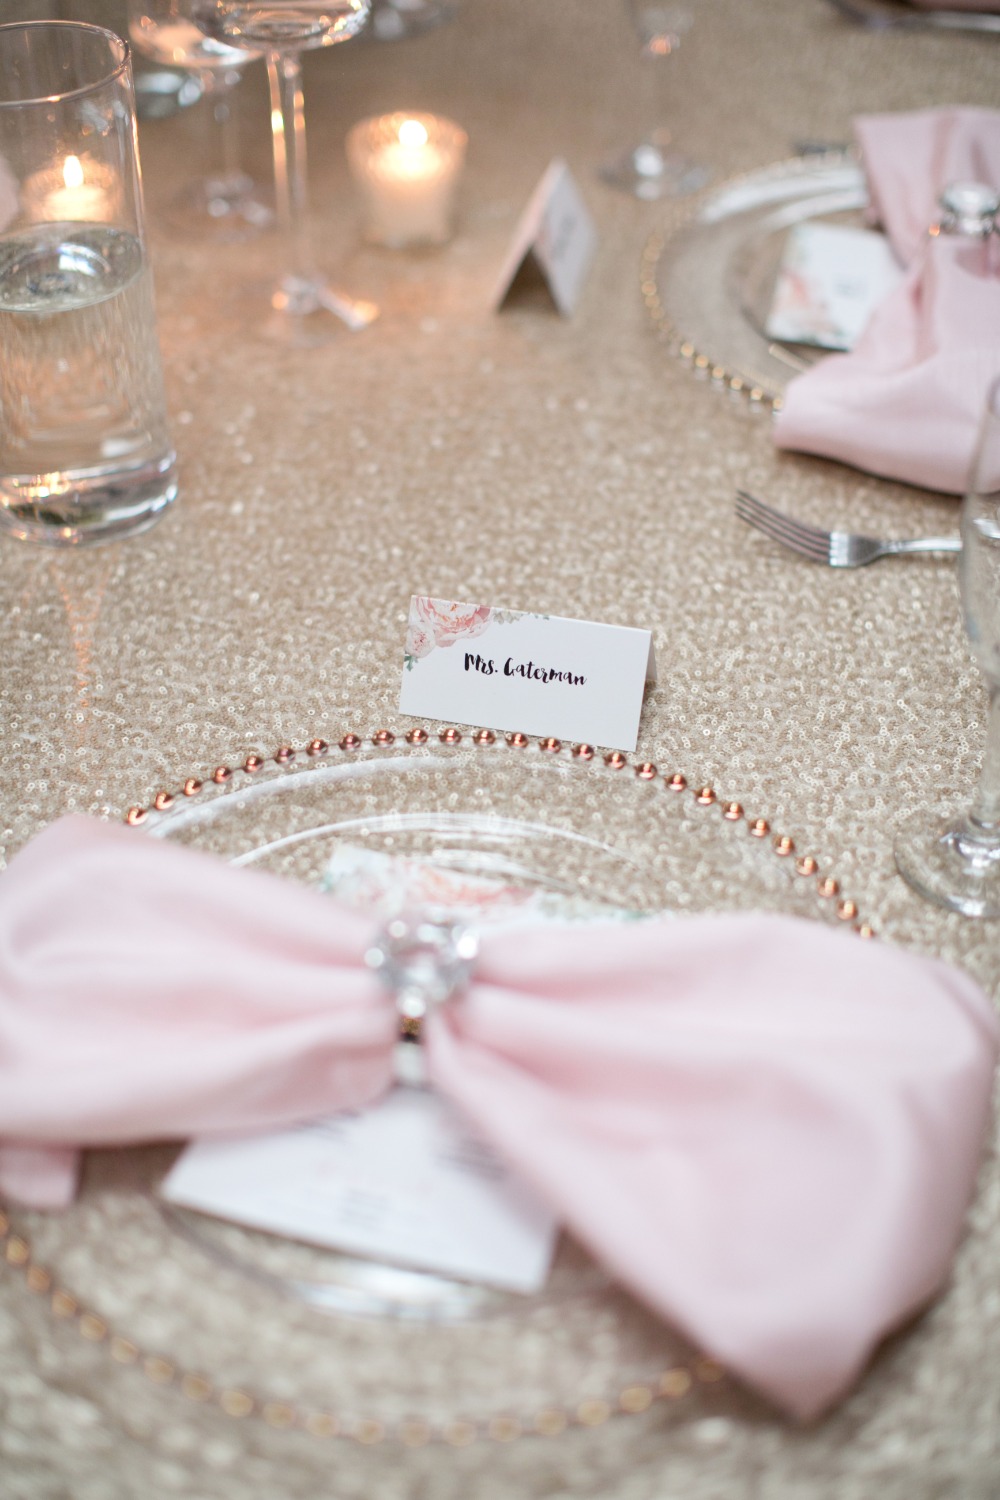 Table scape decor with pink bow napkins